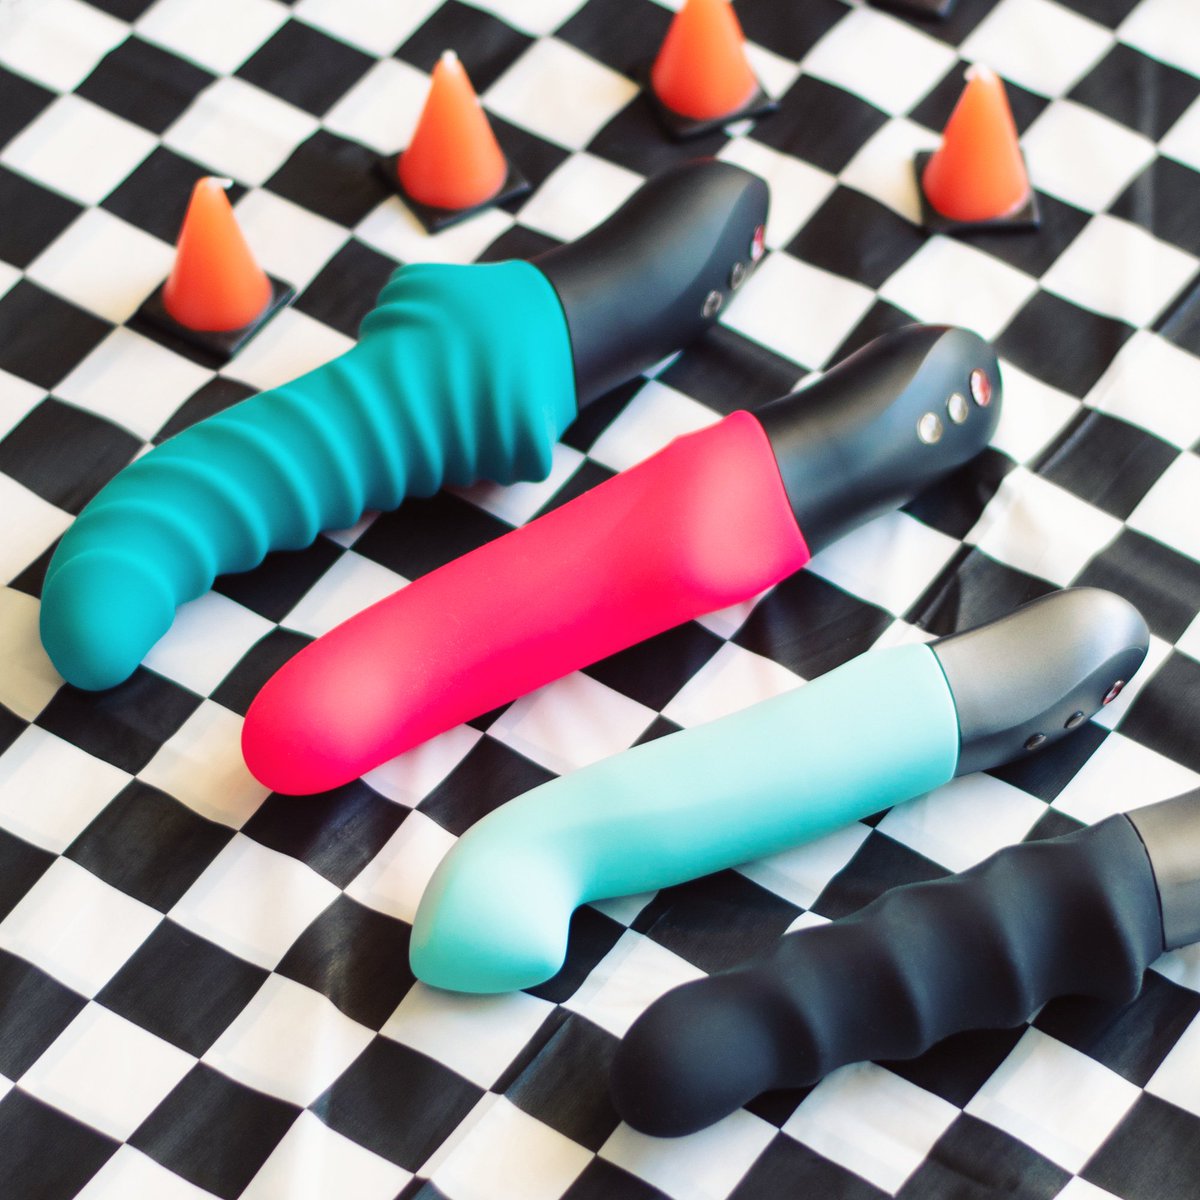 Which self-thrusting sex toy will cross the finish line first in a live rac...